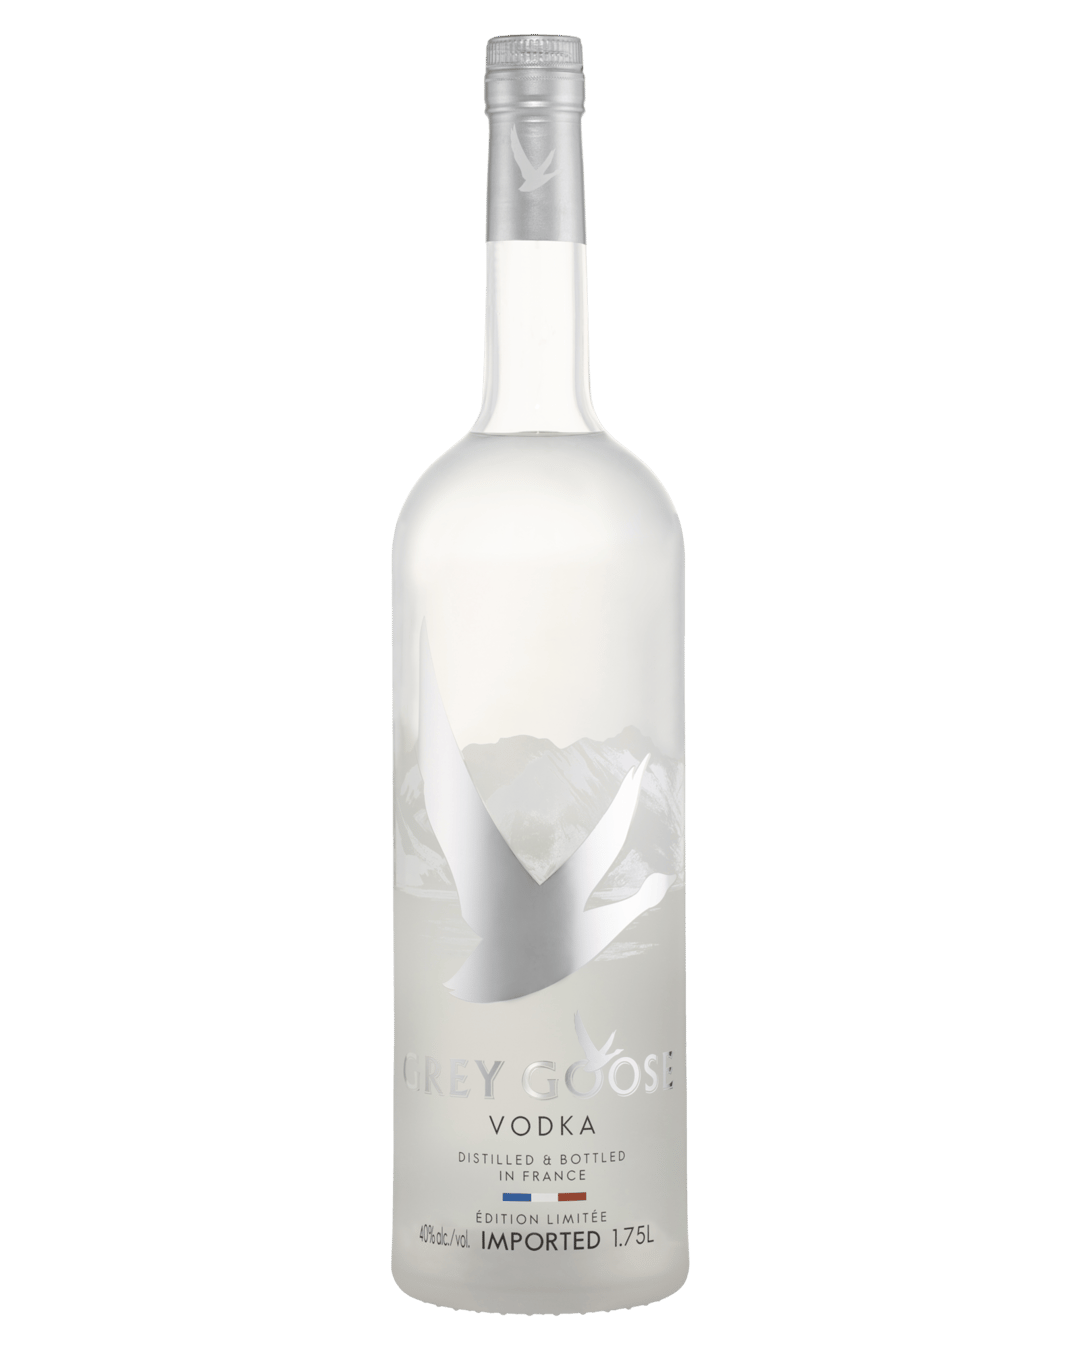 Buy Grey Goose Vodka 700ml online with (same-day FREE delivery*) in  Australia at Everyday Low Prices: BWS